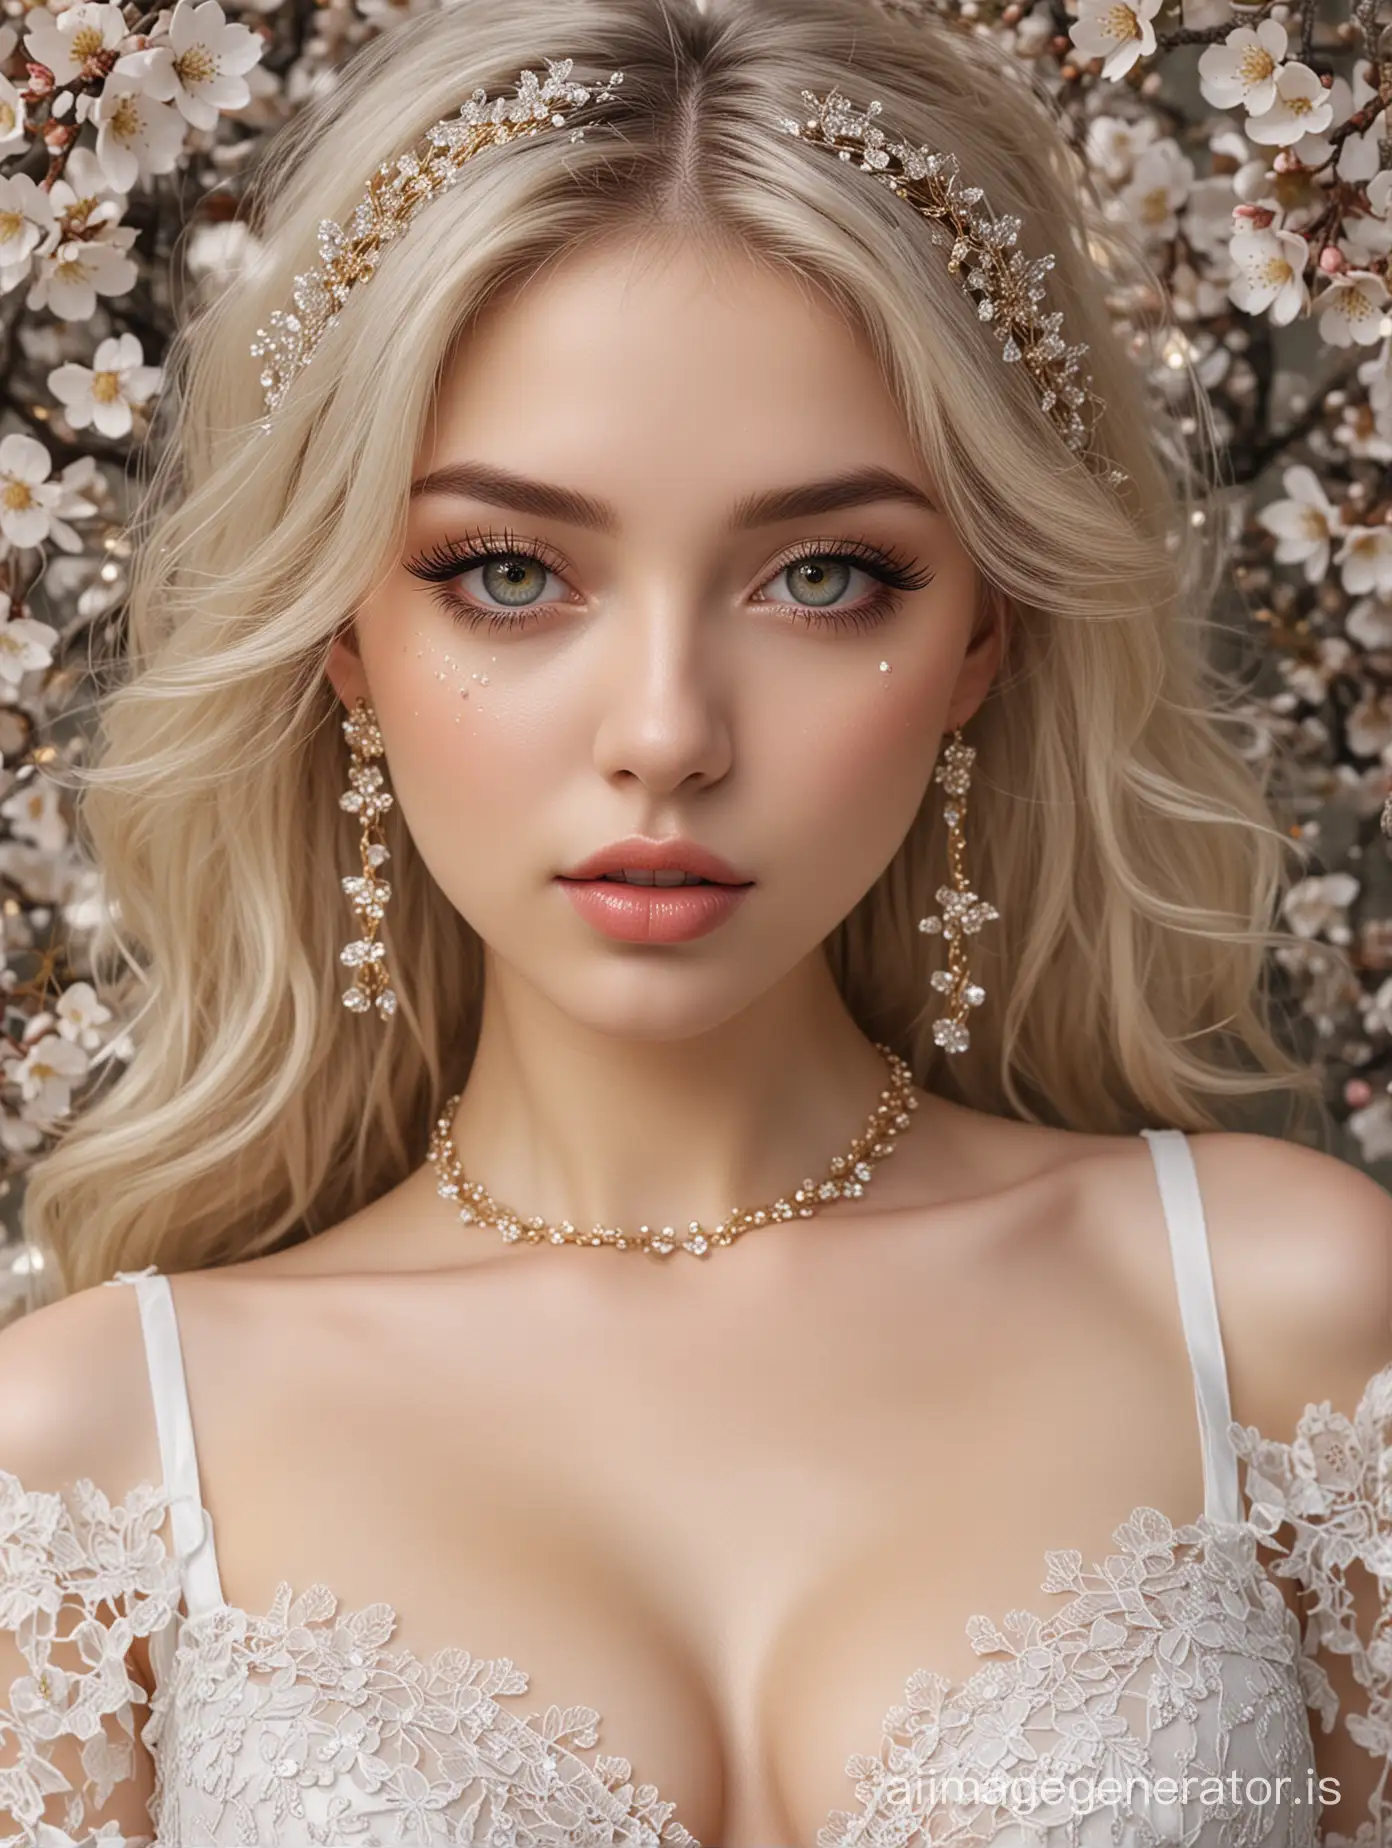 Ethereal-Porcelain-Beauty-Among-Cherry-Blossoms-and-Lace-Glamorous-Portrait-in-Golden-Lingerie